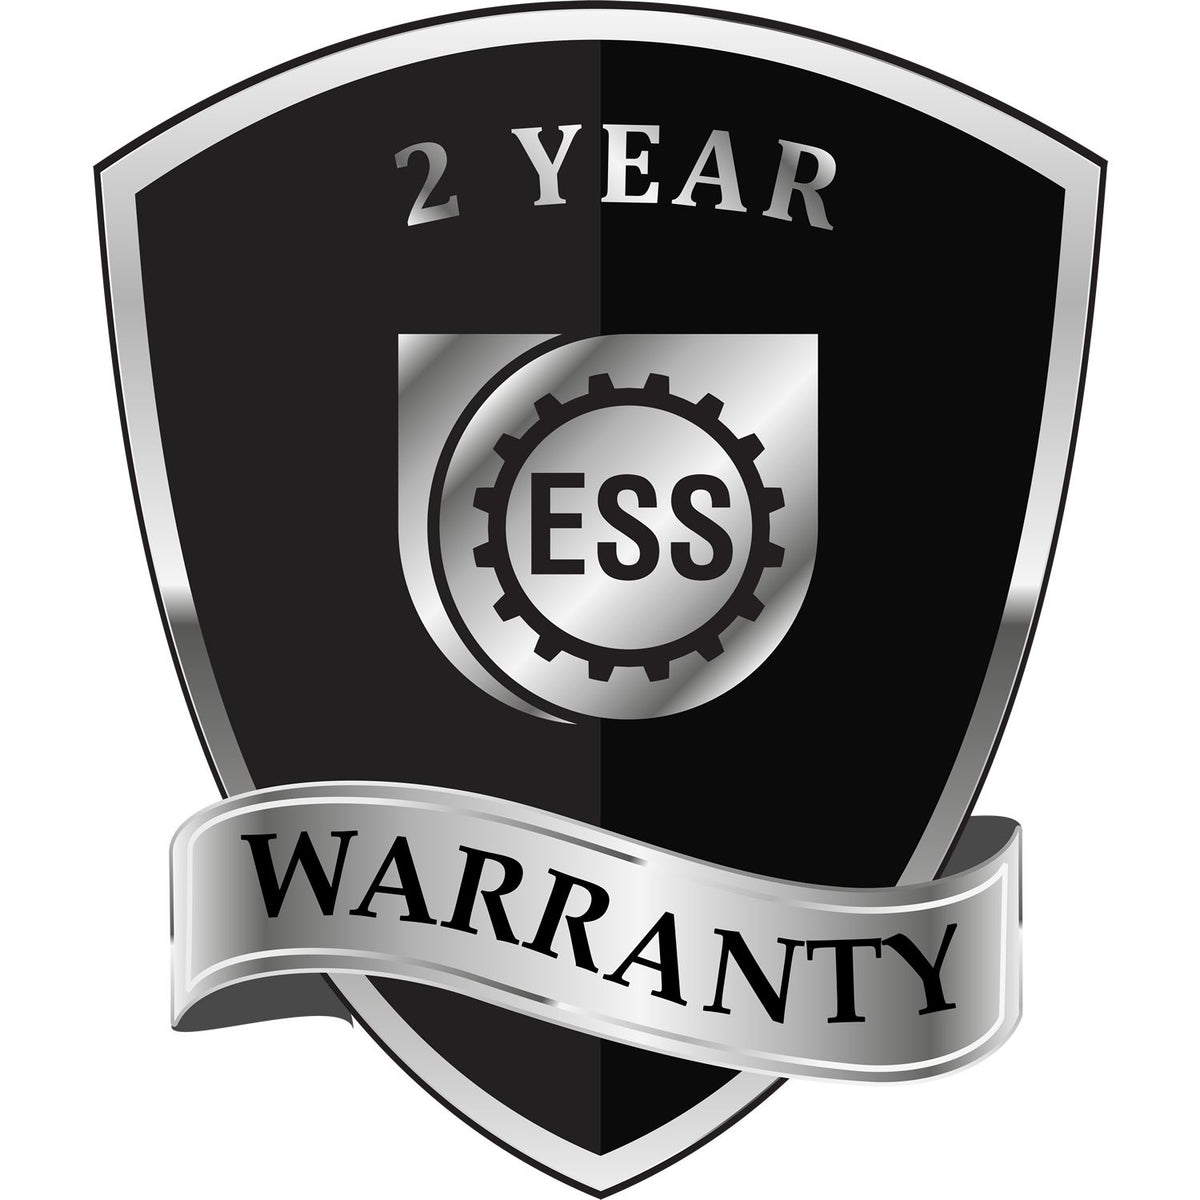 A badge or emblem showing a warranty icon for the Extended Long Reach Delaware Surveyor Embosser